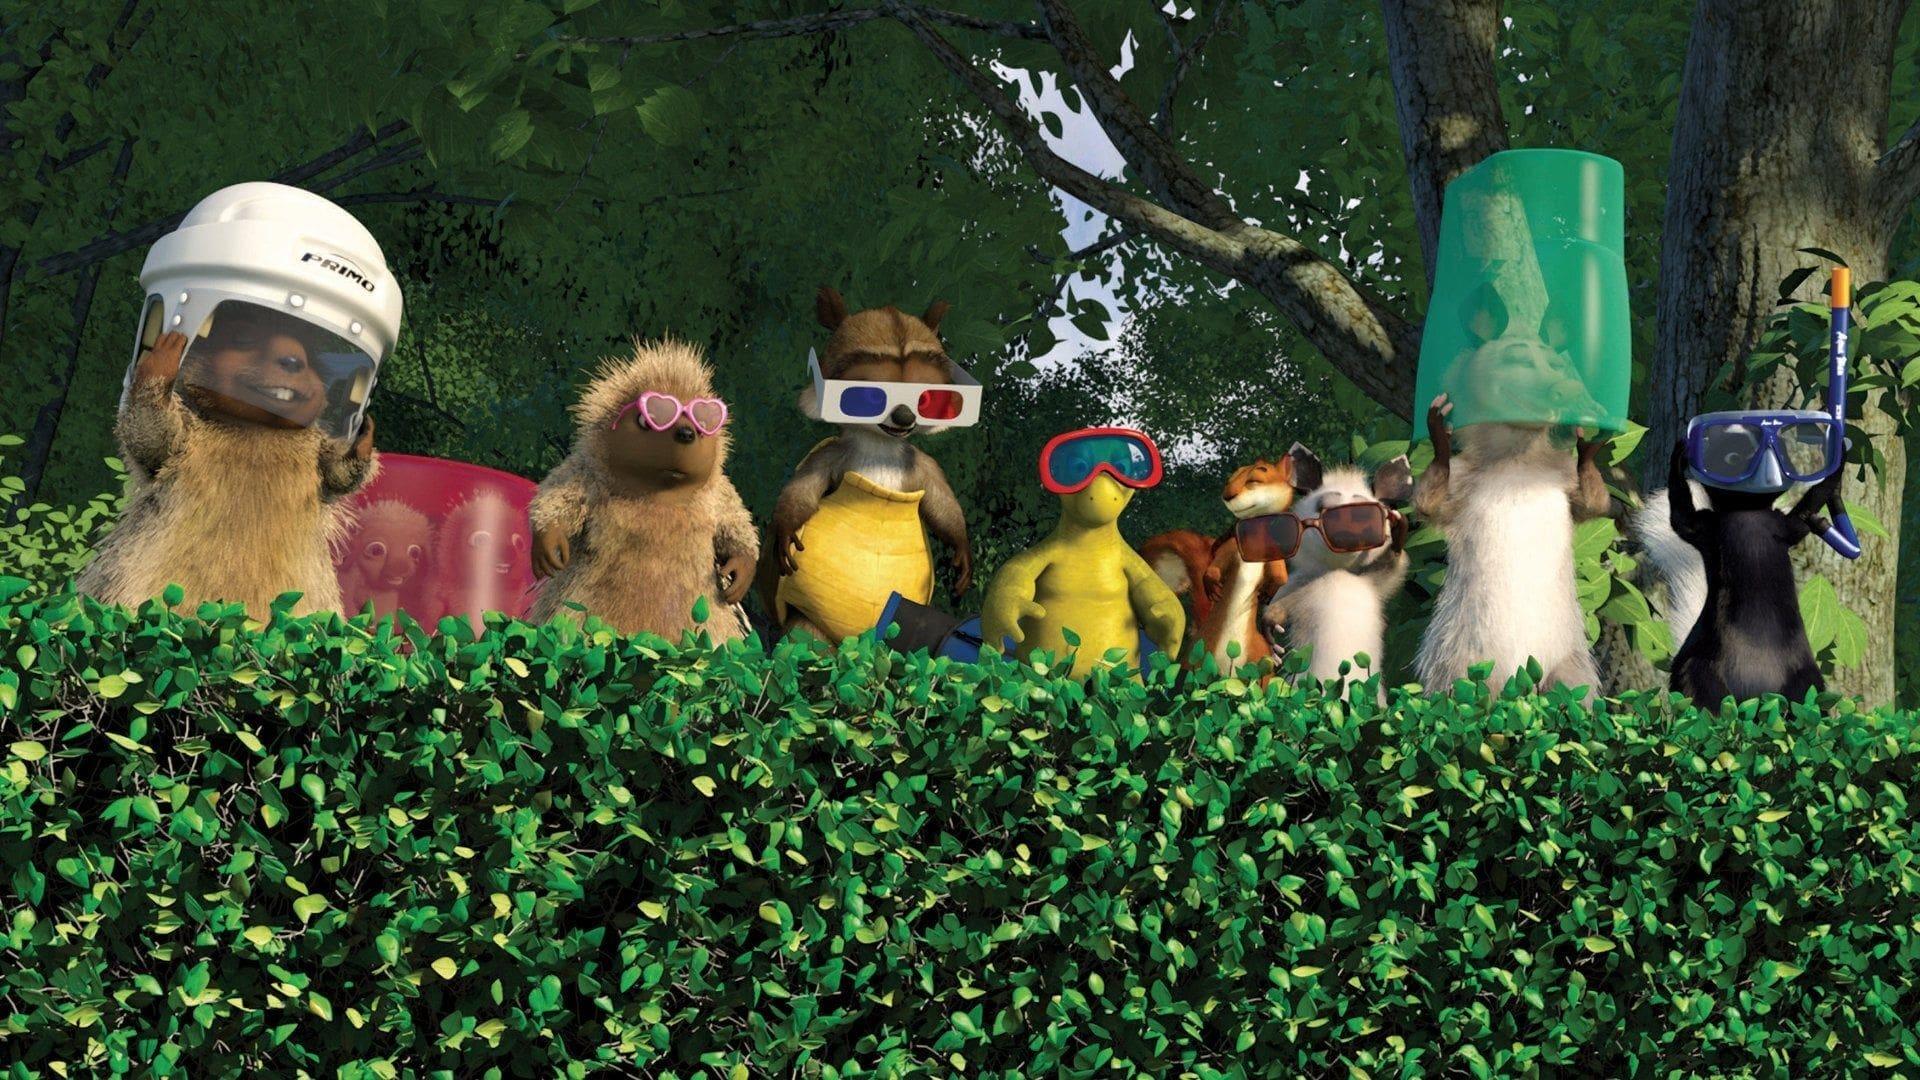 Over the Hedge backdrop